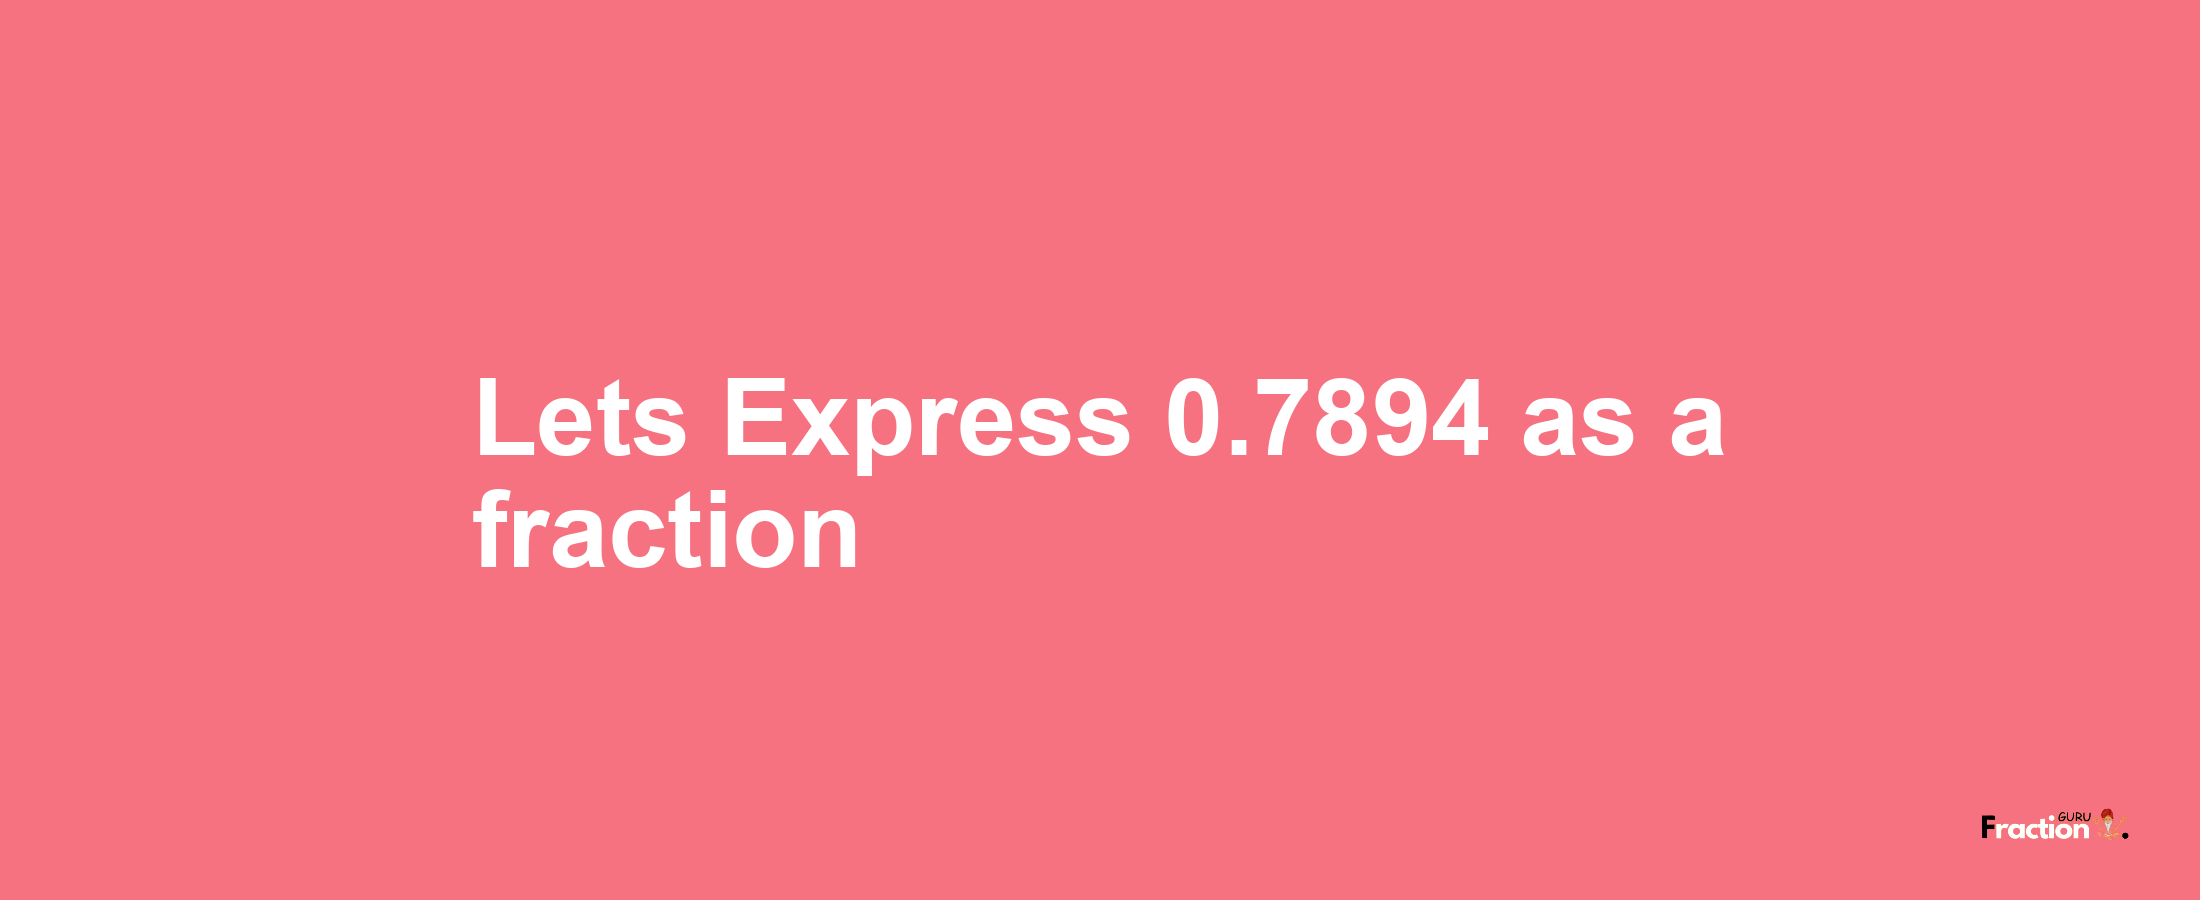 Lets Express 0.7894 as afraction